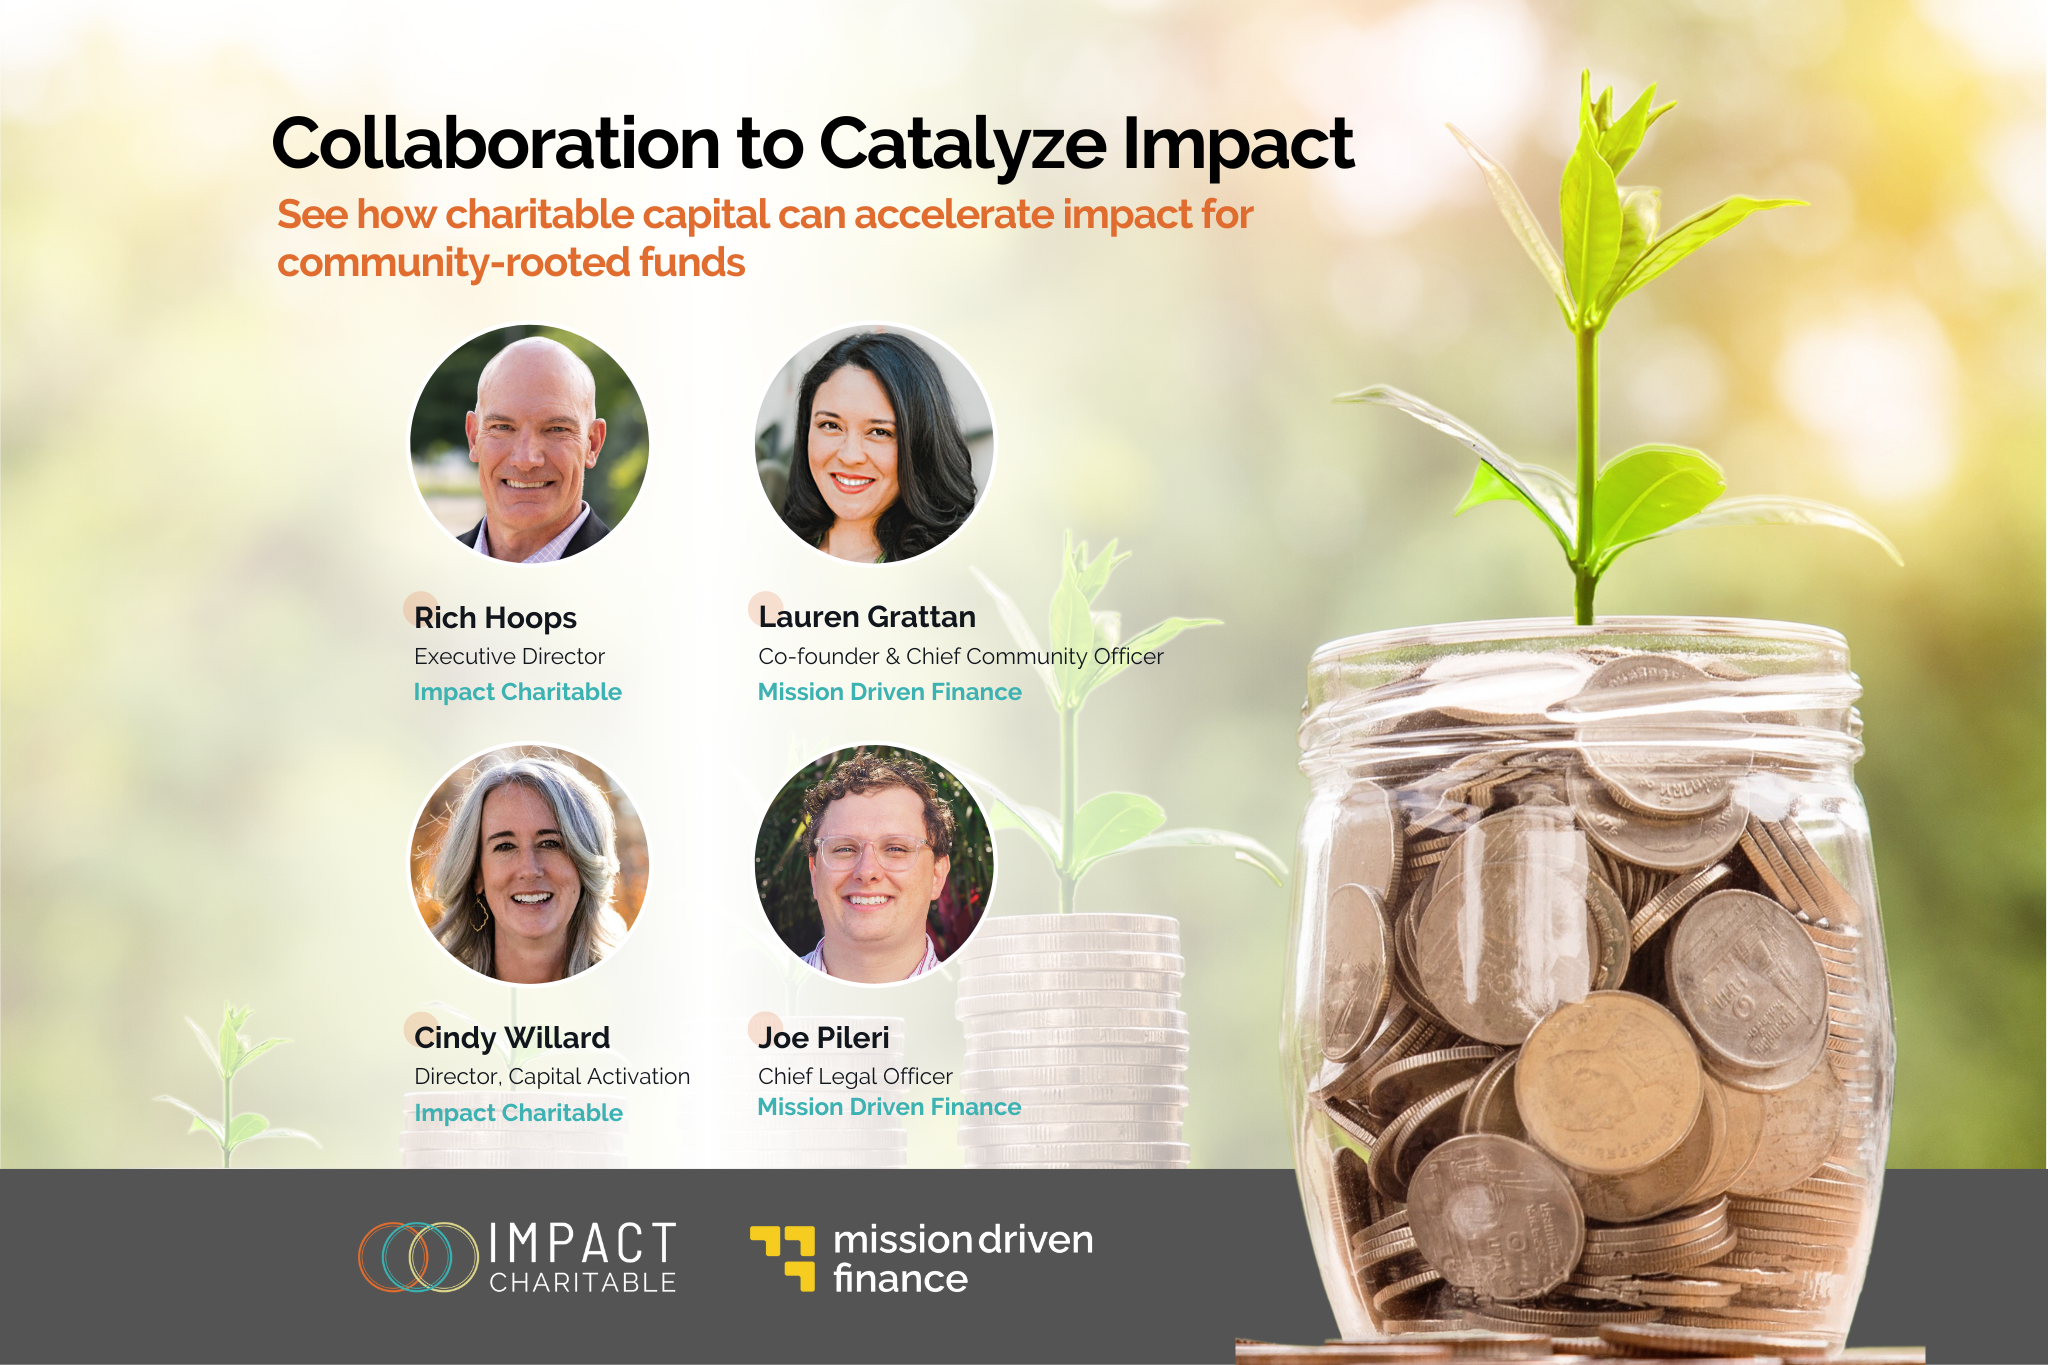 Collaboration to Catalyze Impact: Impact Charitable and Mission Driven Finance discuss how charitable capital can accelerate impact for community-rooted funds